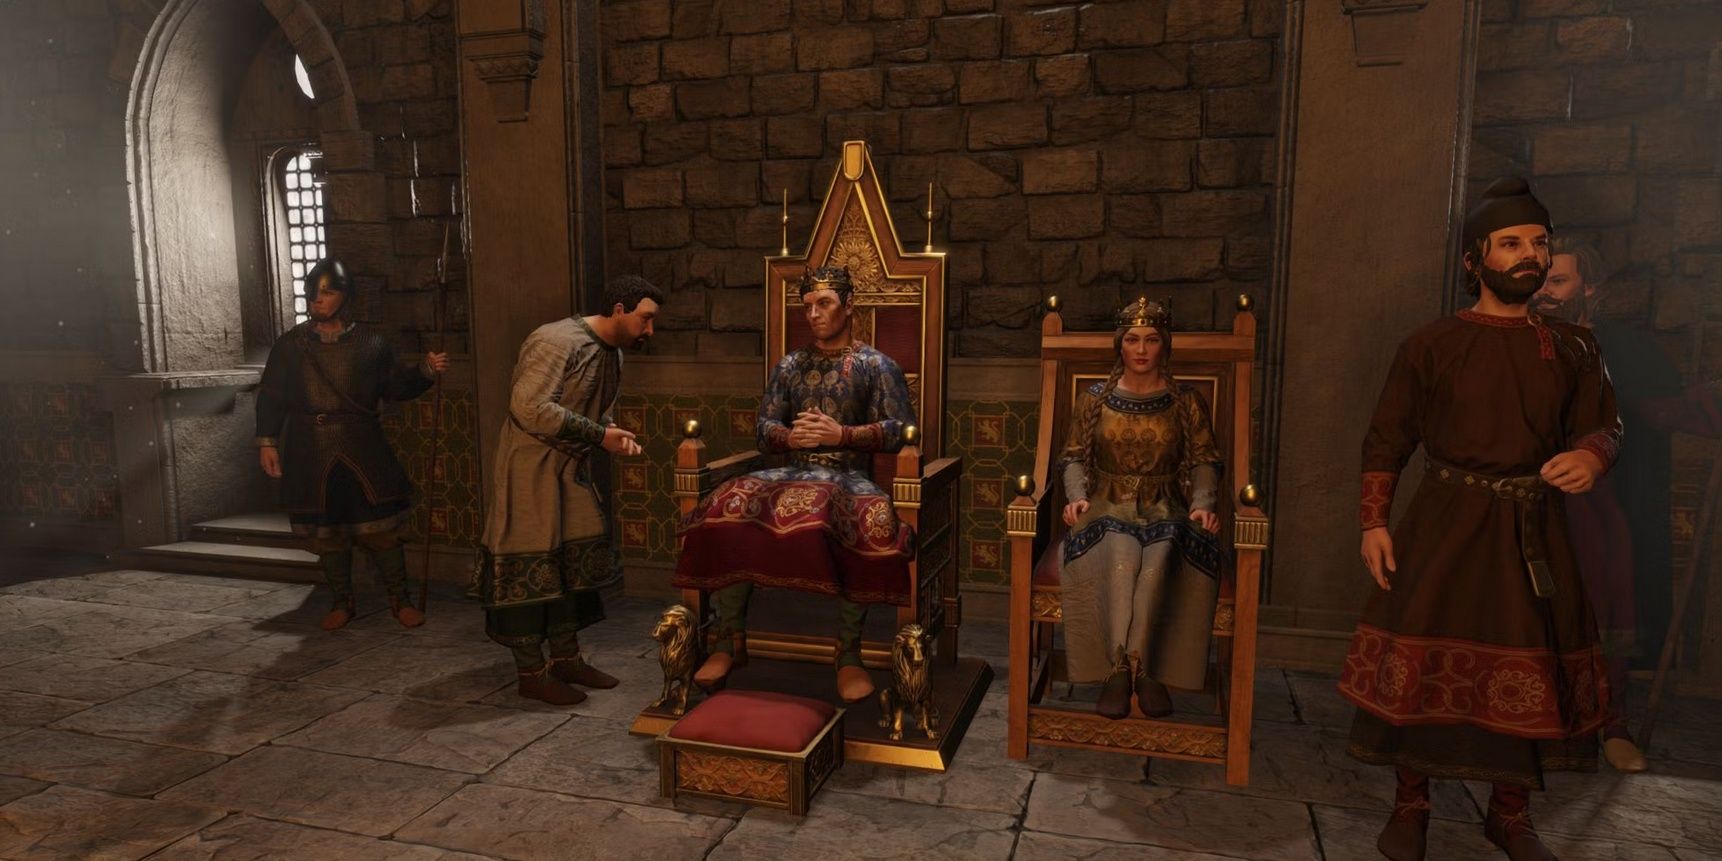 A scene from the Royal Court in Crusader Kings 3